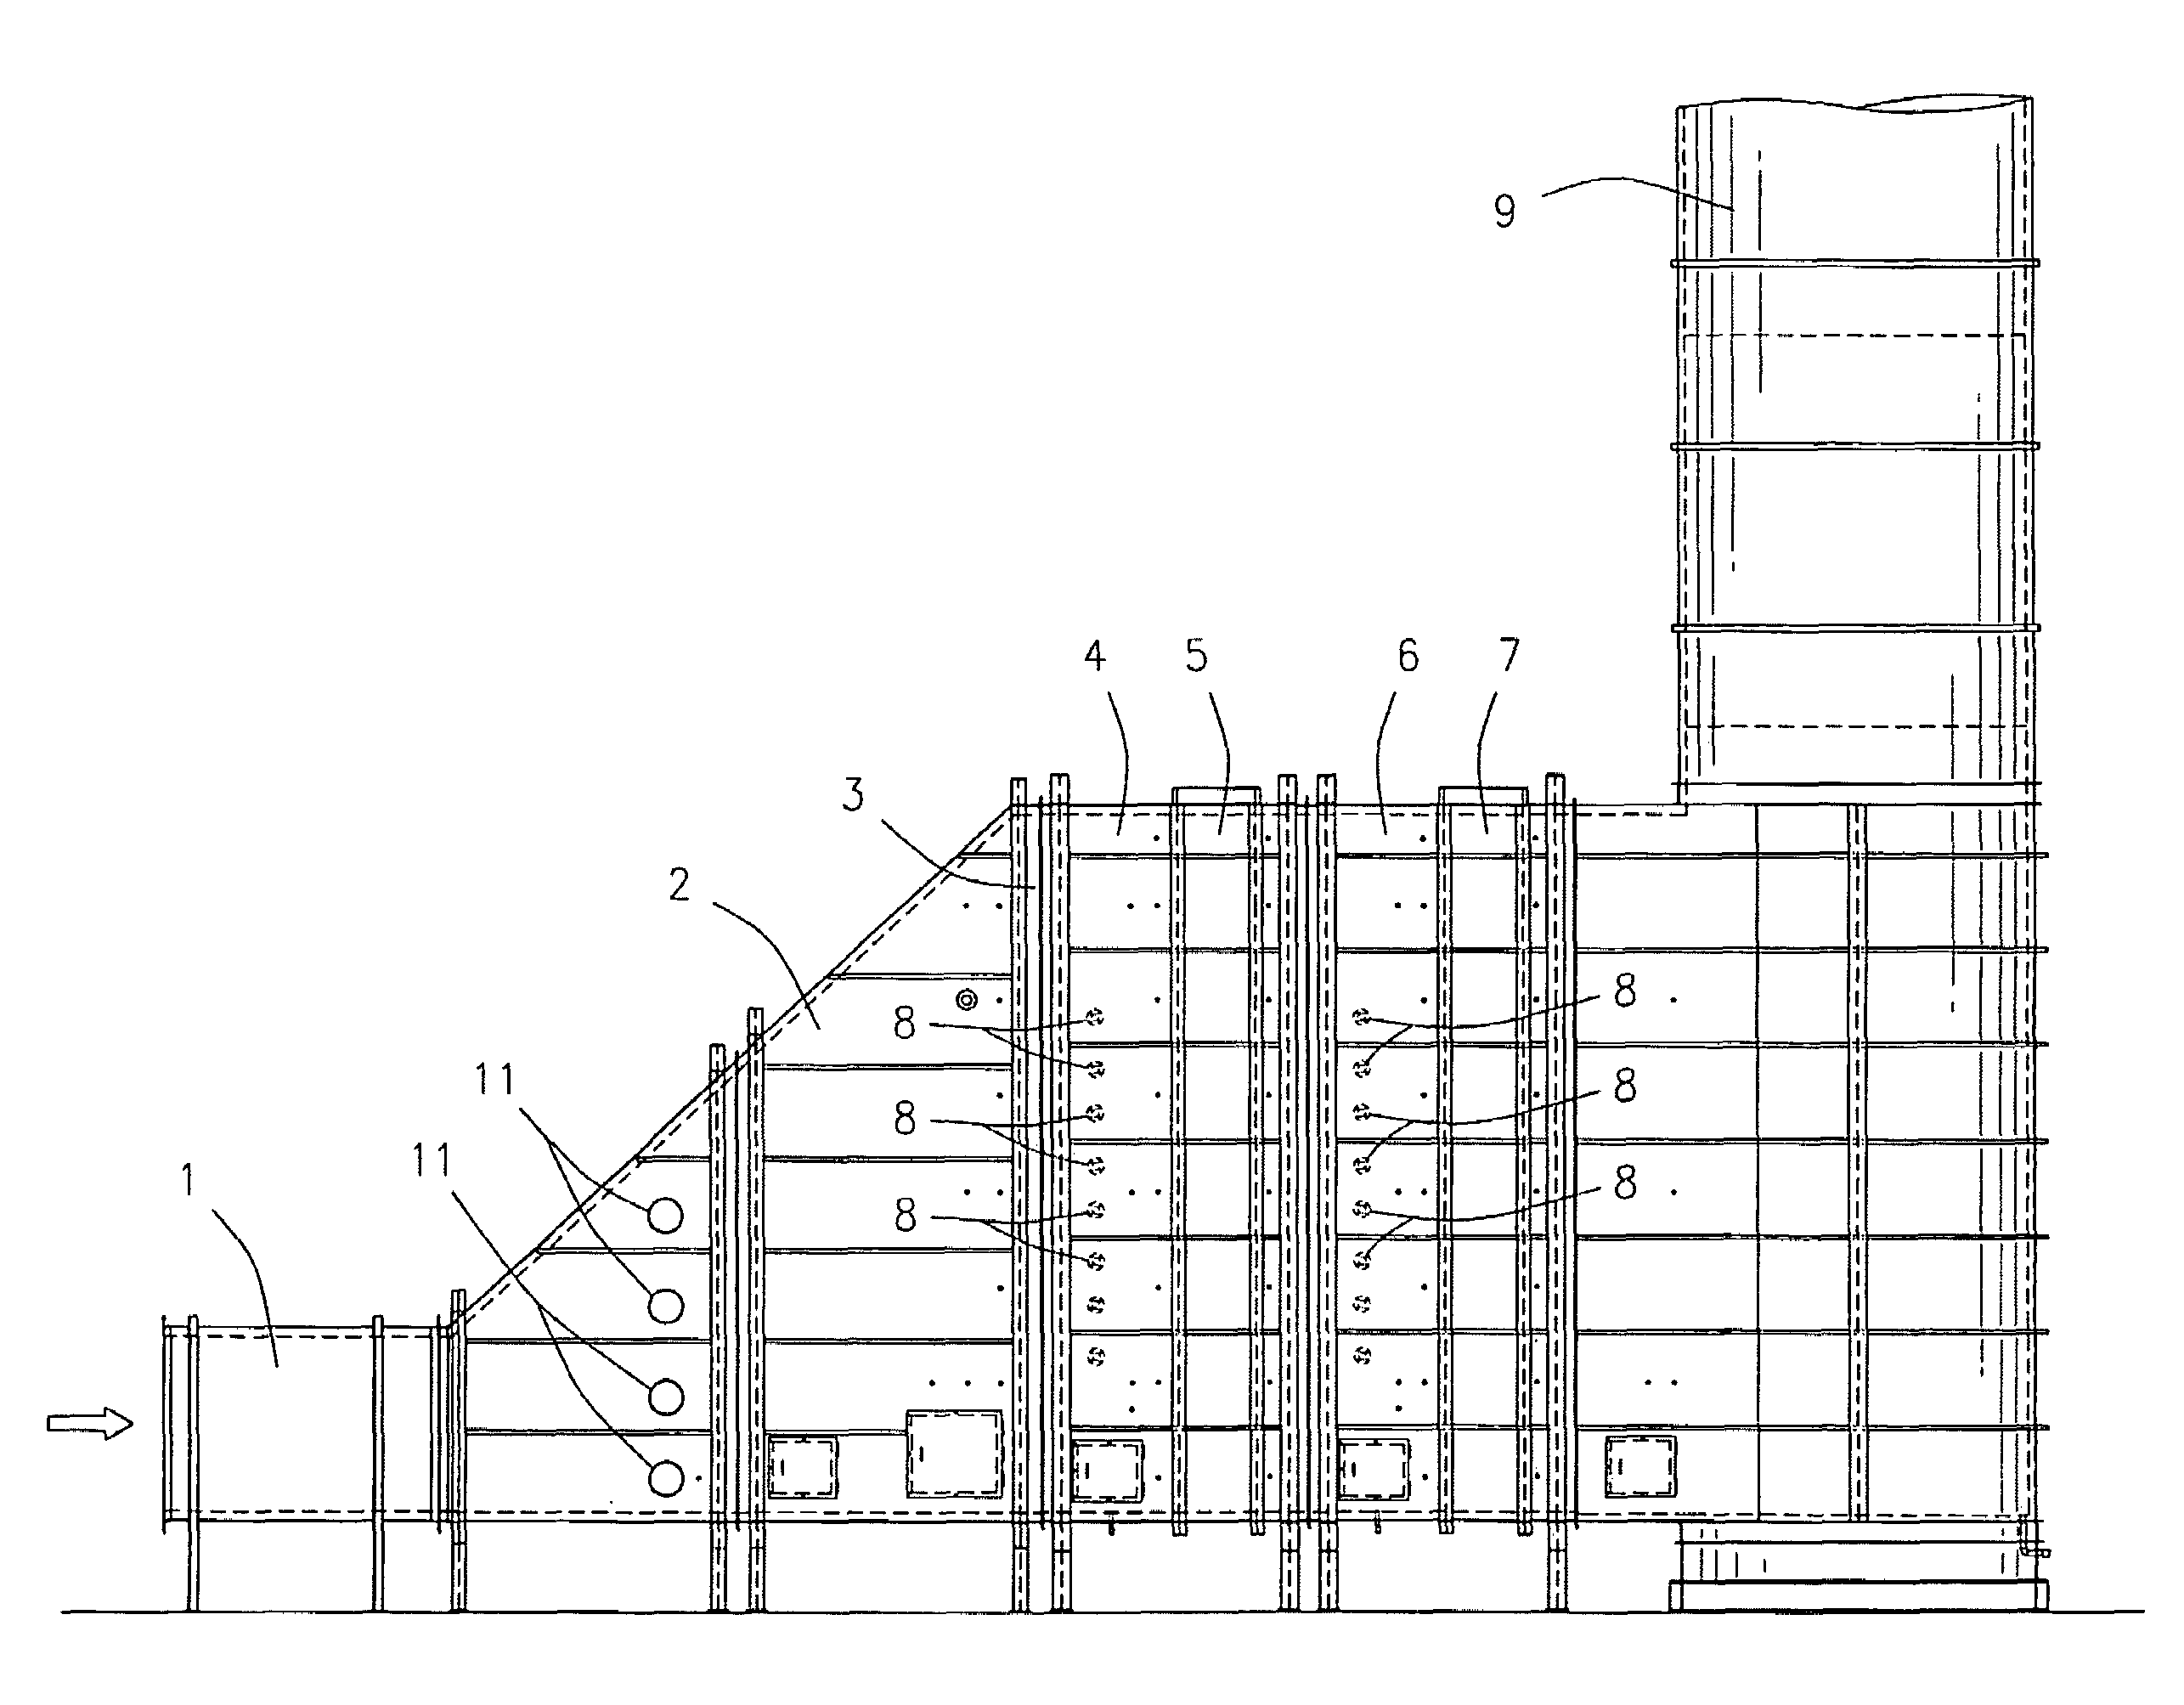 Multi-bed selective catalytic reduction system